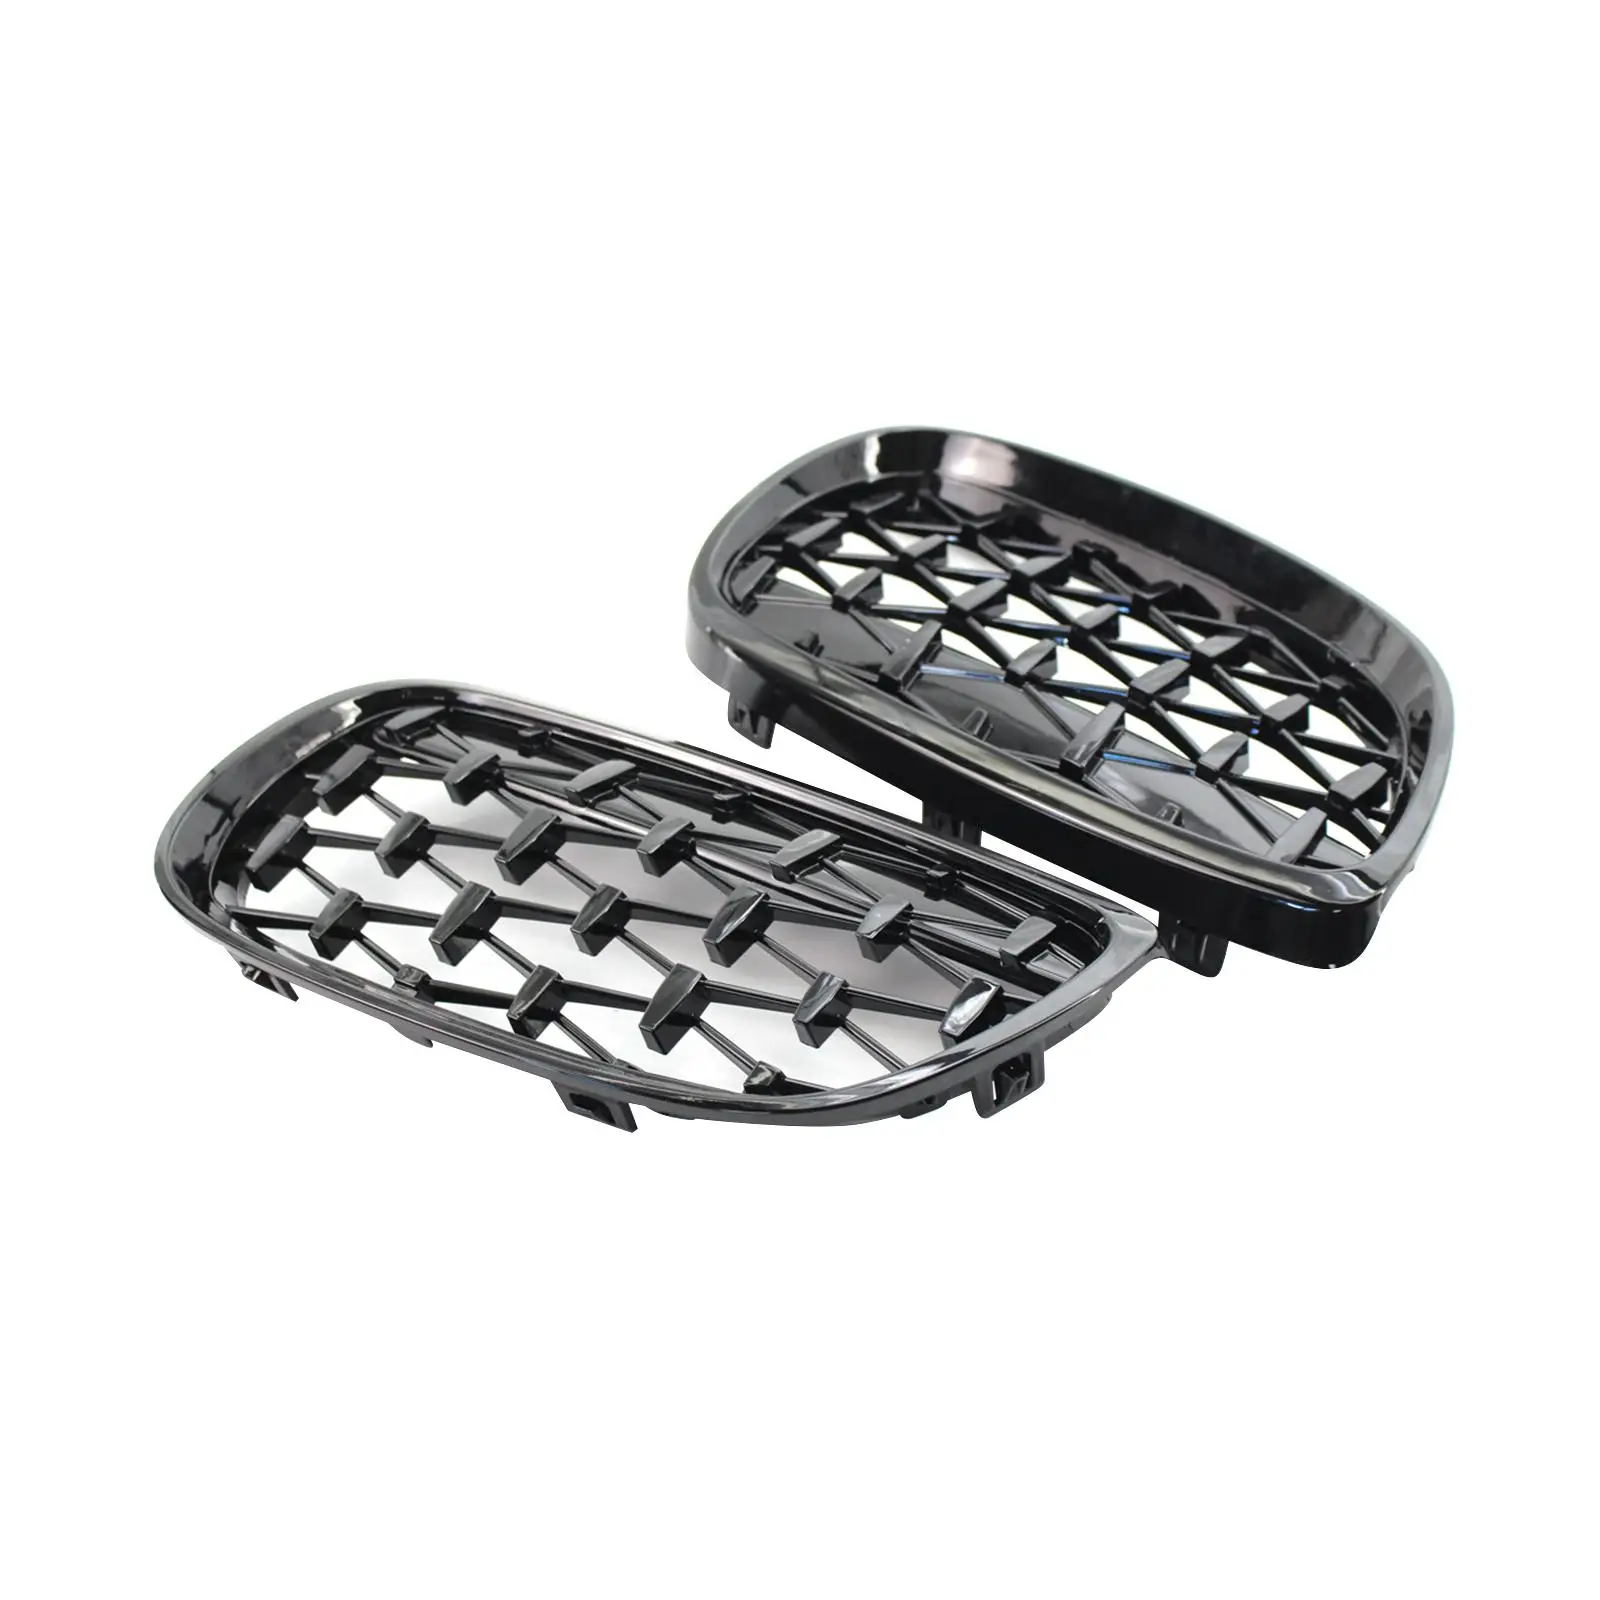 2x Automotive Front Hood Kidney Grille Grill 51137157278 Left Right for BMW E92 E93 3 Series Replace Durable